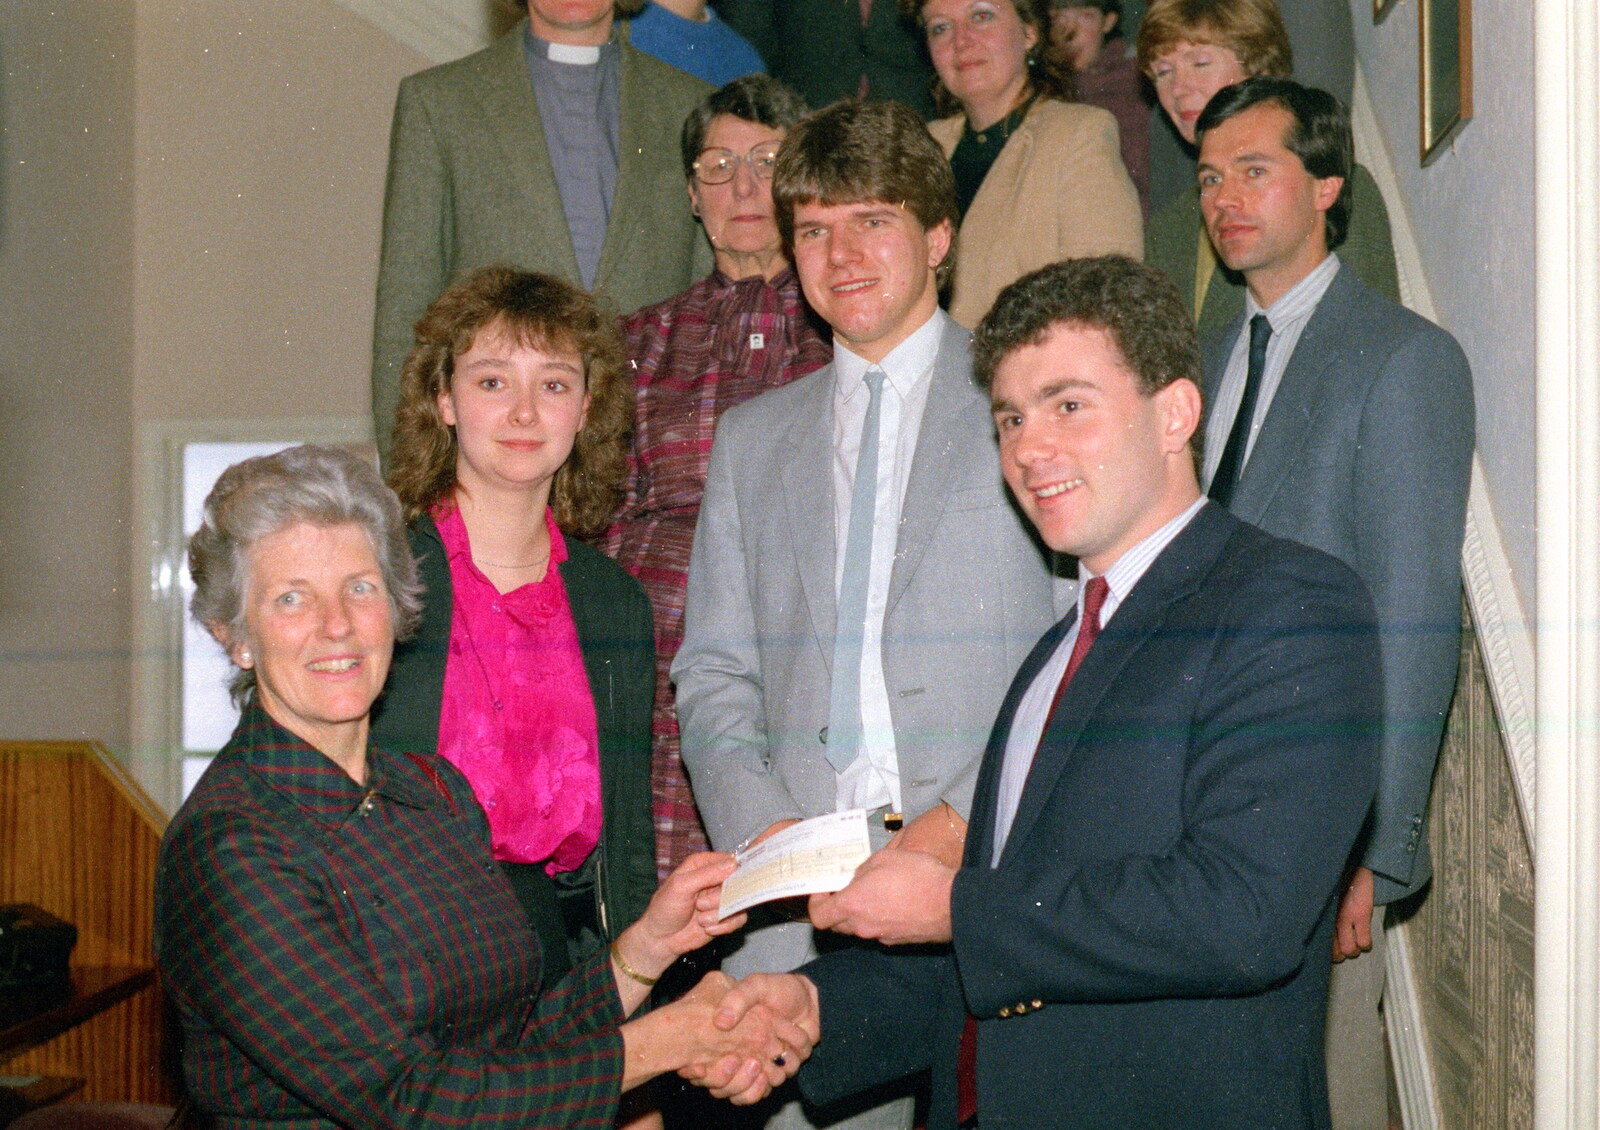 Martin hands over a cheque from Uni: Student Politics, and Hanging Around The Hoe, Plymouth - 12th April 1986